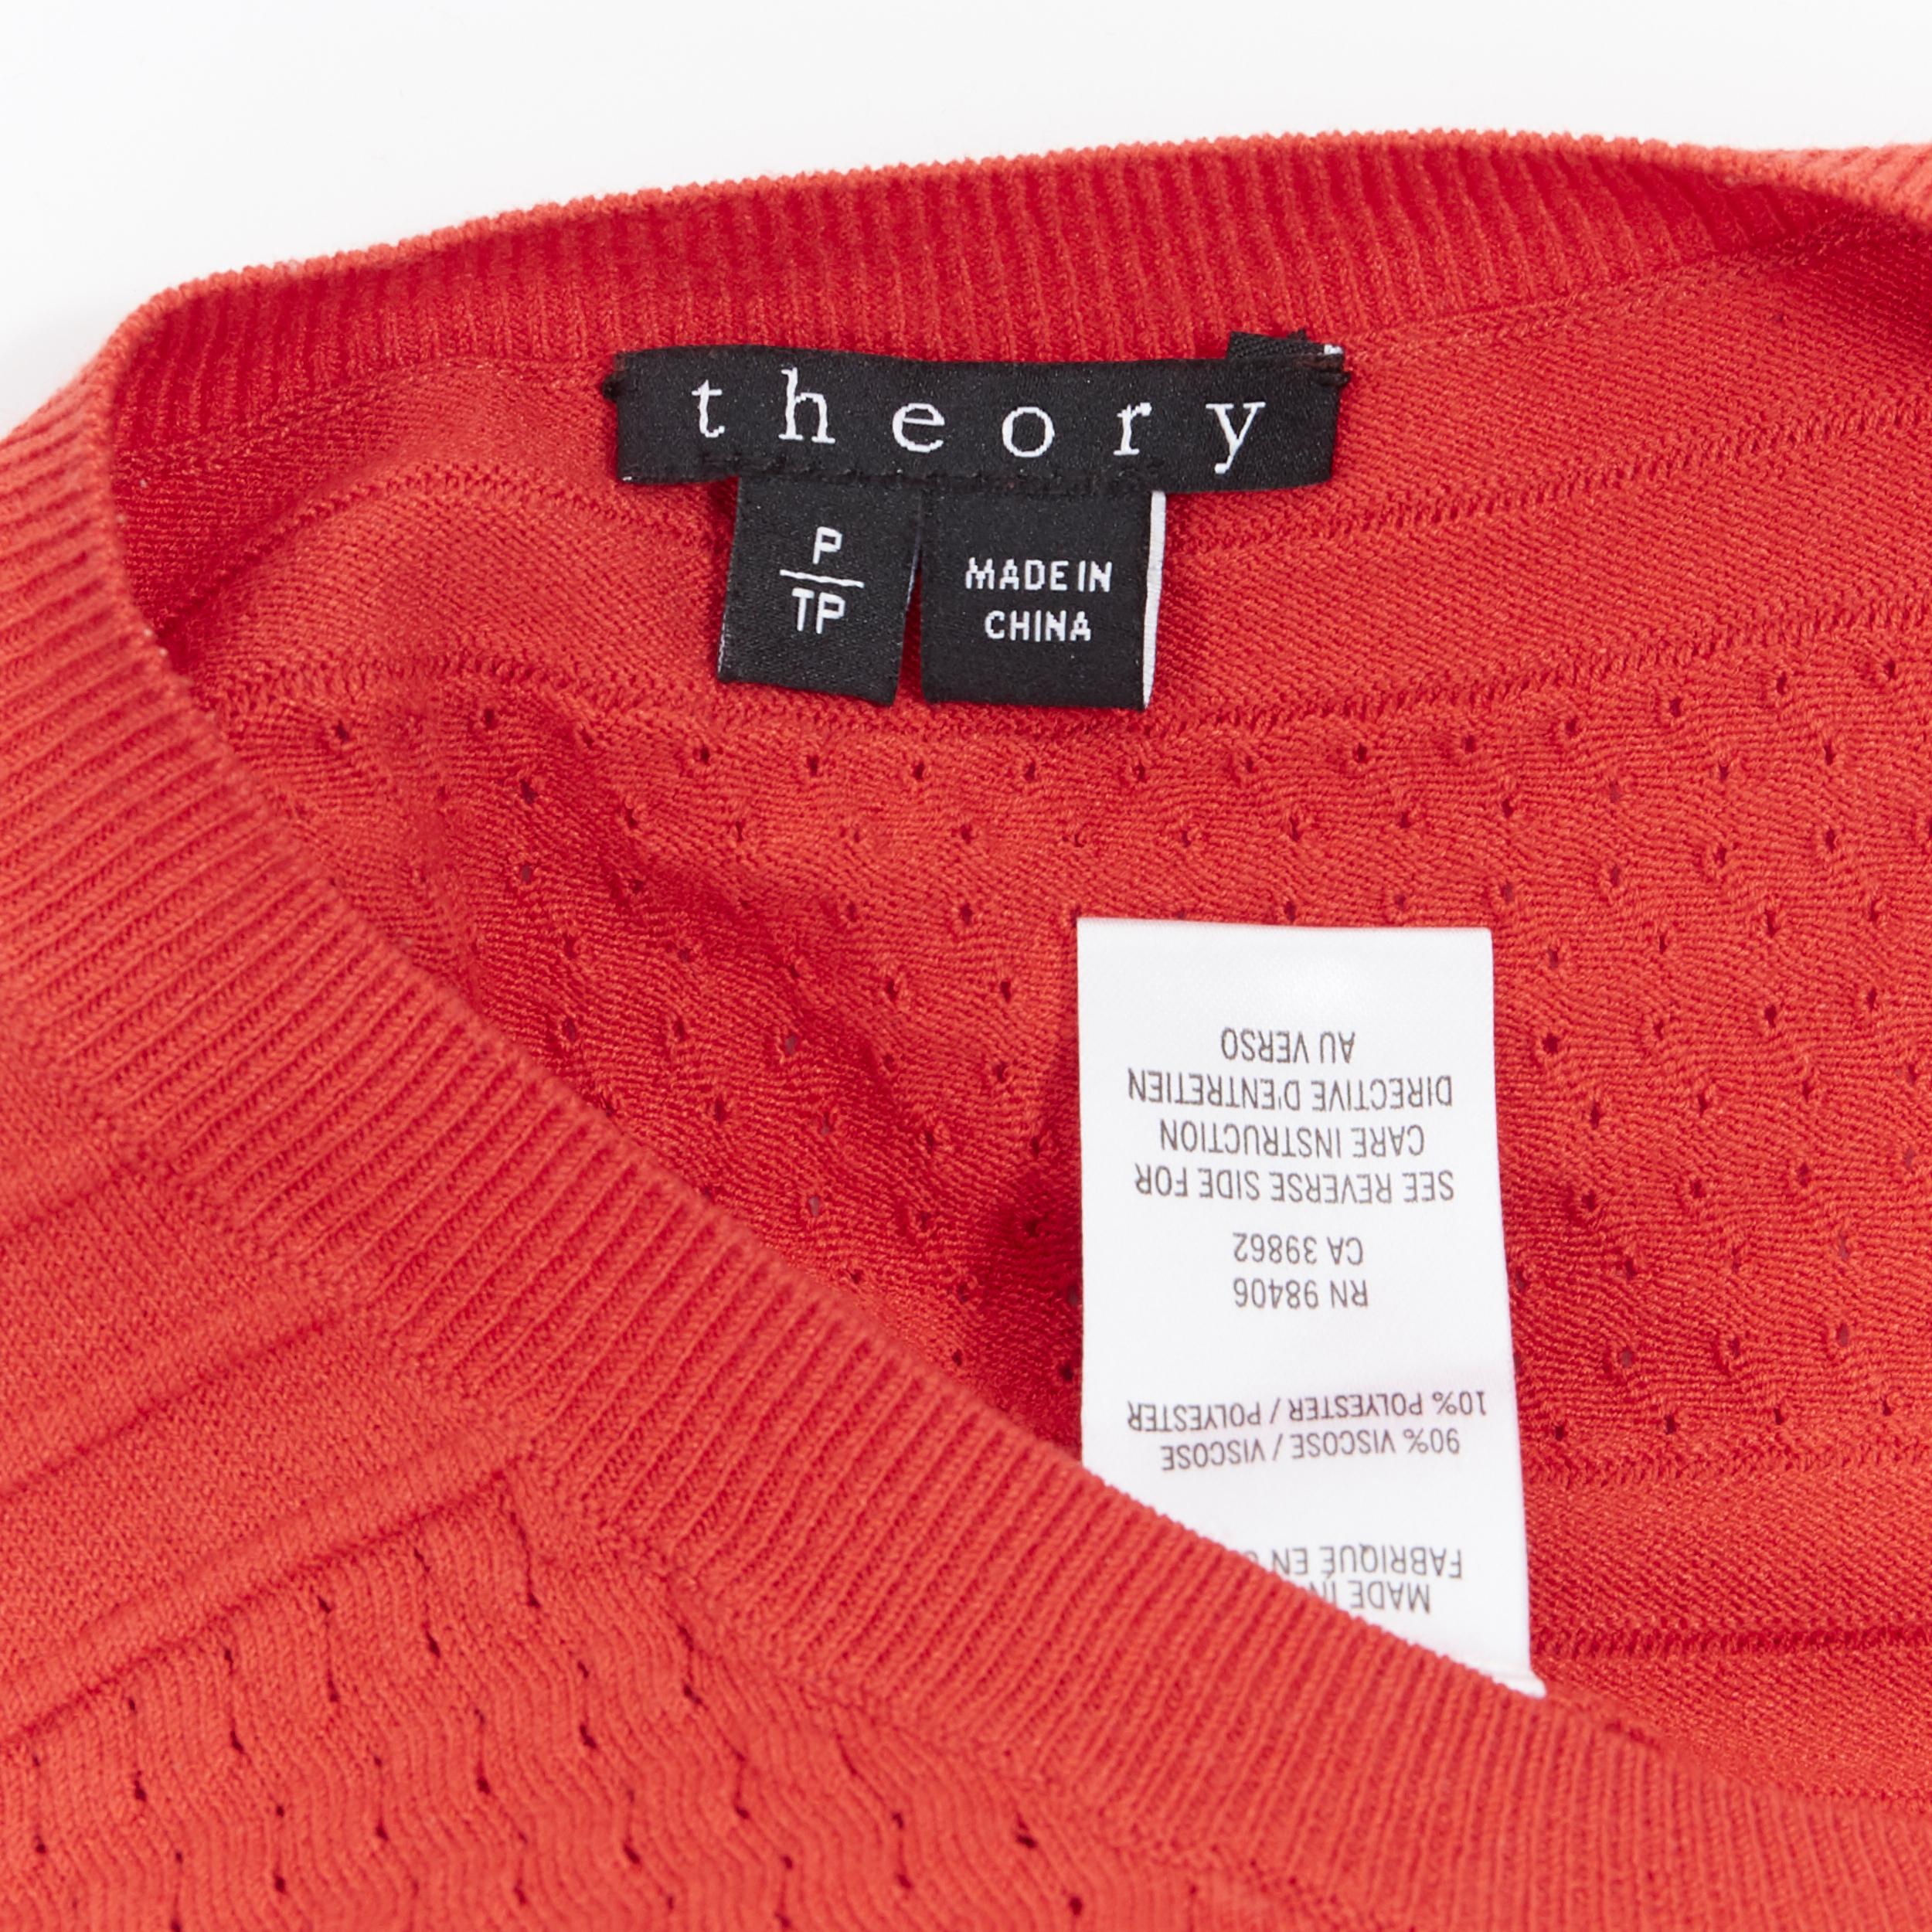 THEORY red polyester textured jacquard knit sleeveless vest top XS 1